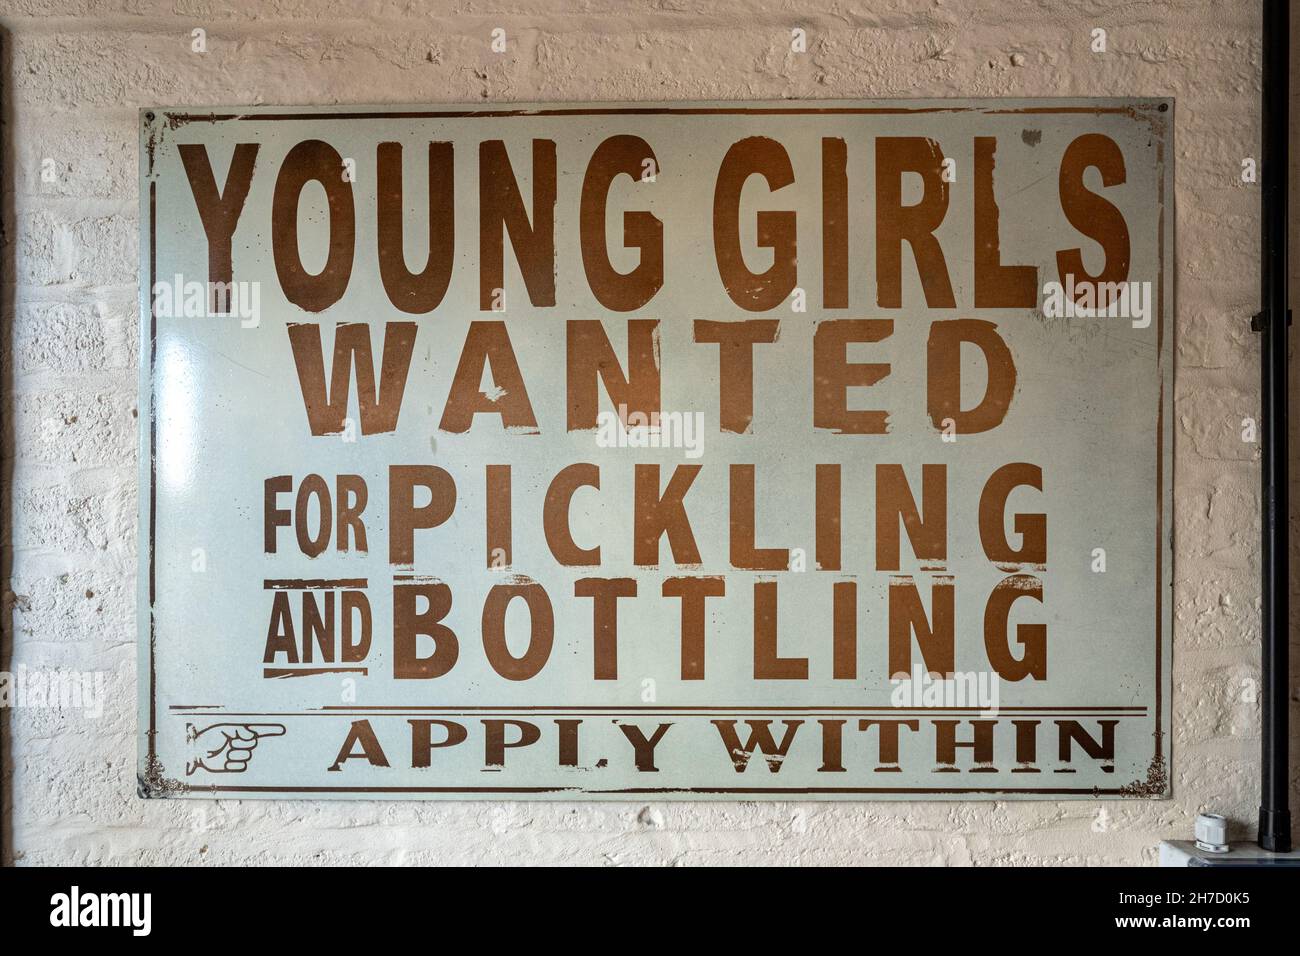 Vintage poster advertisement, Young girls wanted for pickling and bottling, apply within, UK Stock Photo